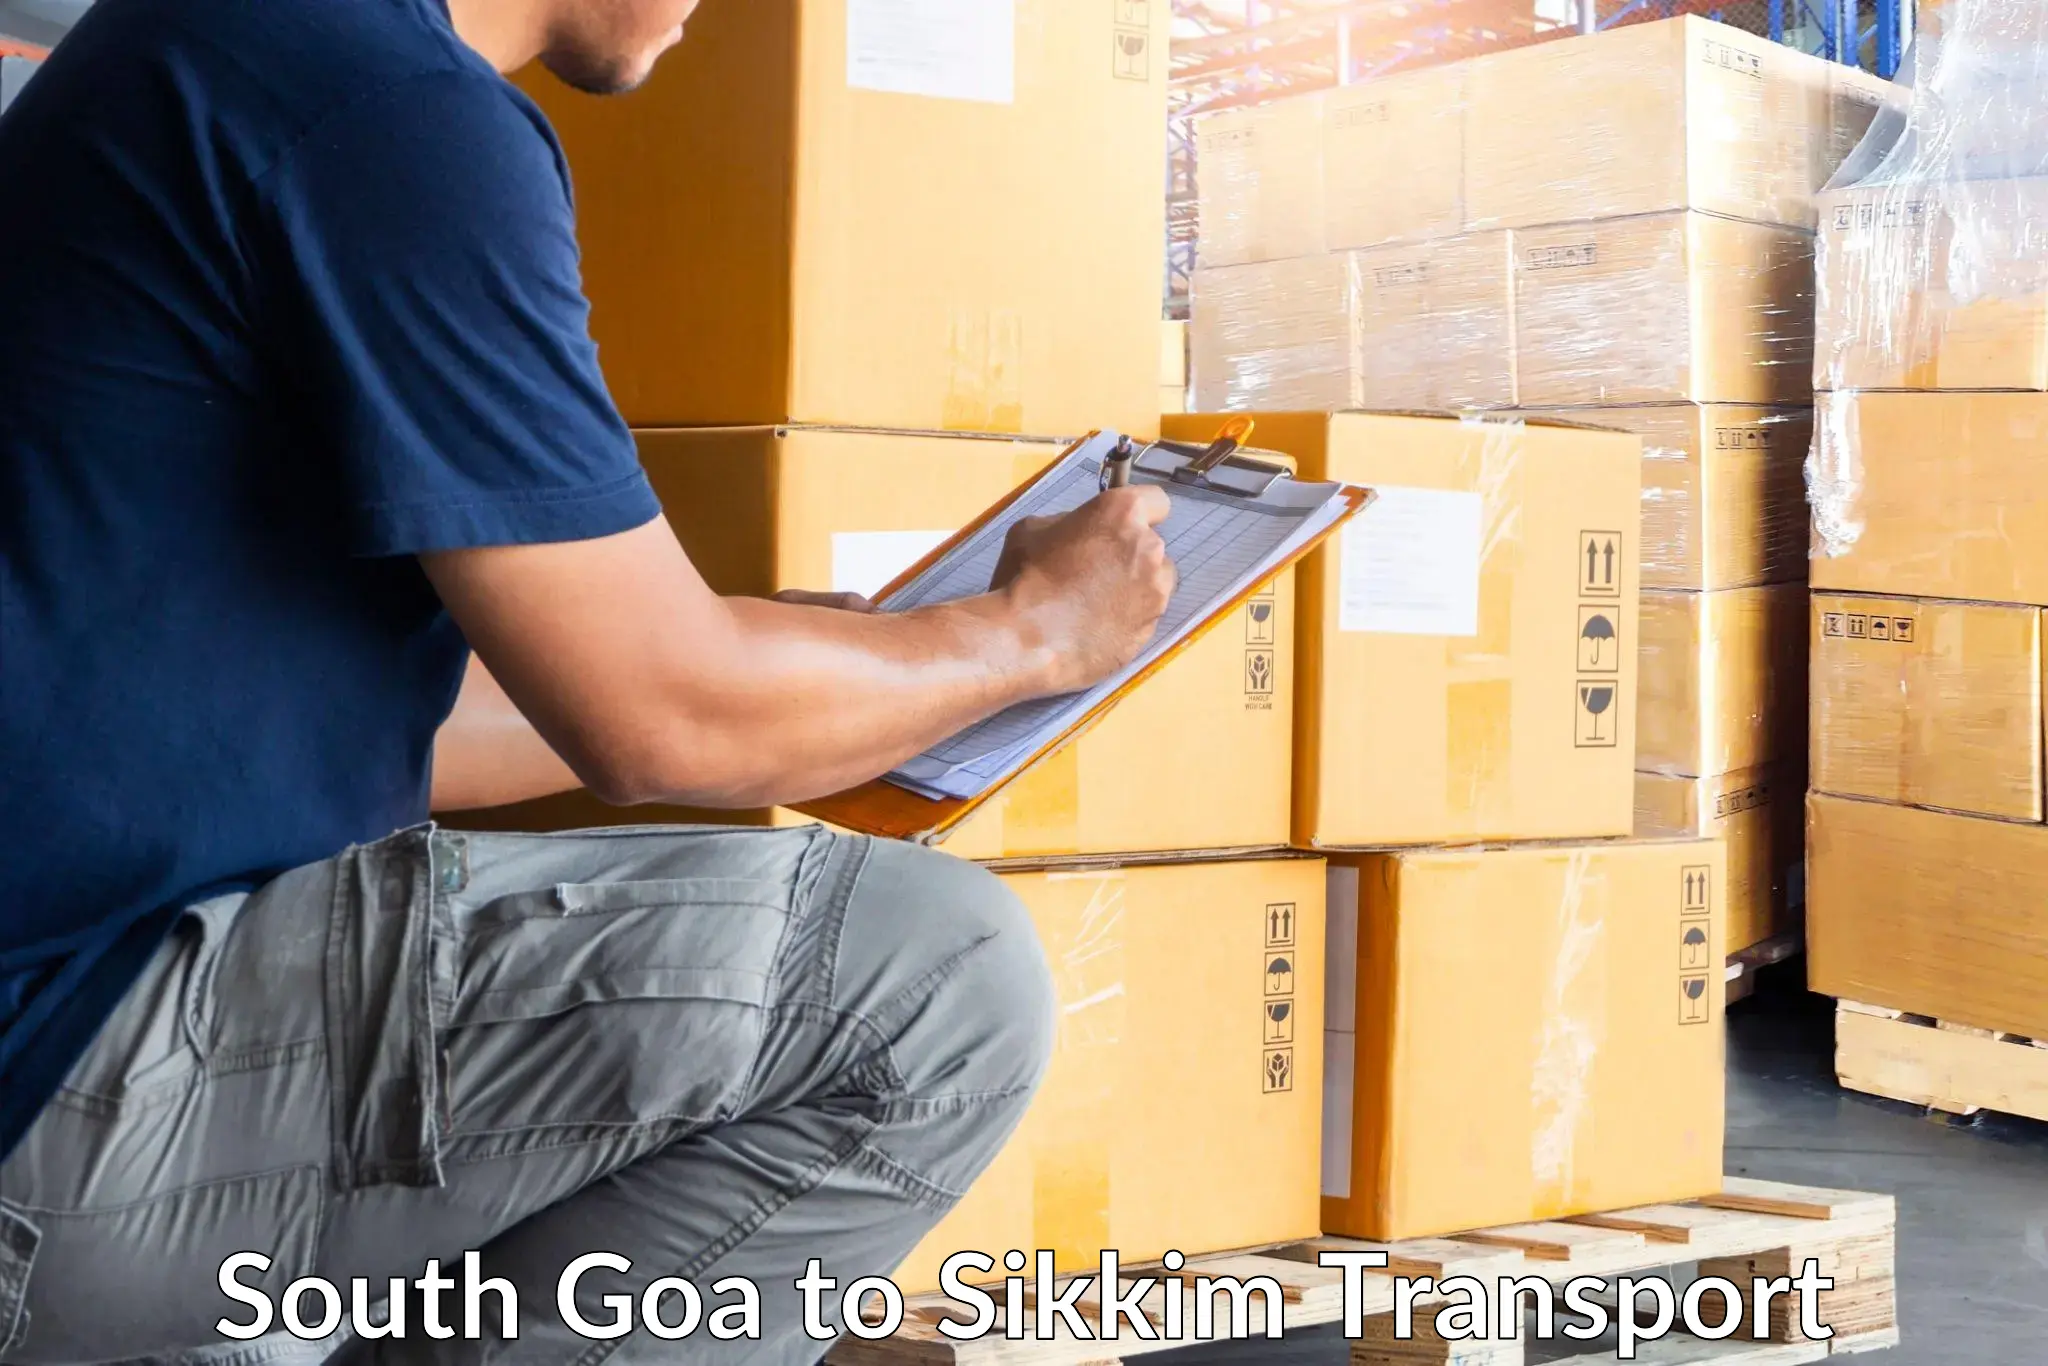 Container transport service South Goa to Pelling